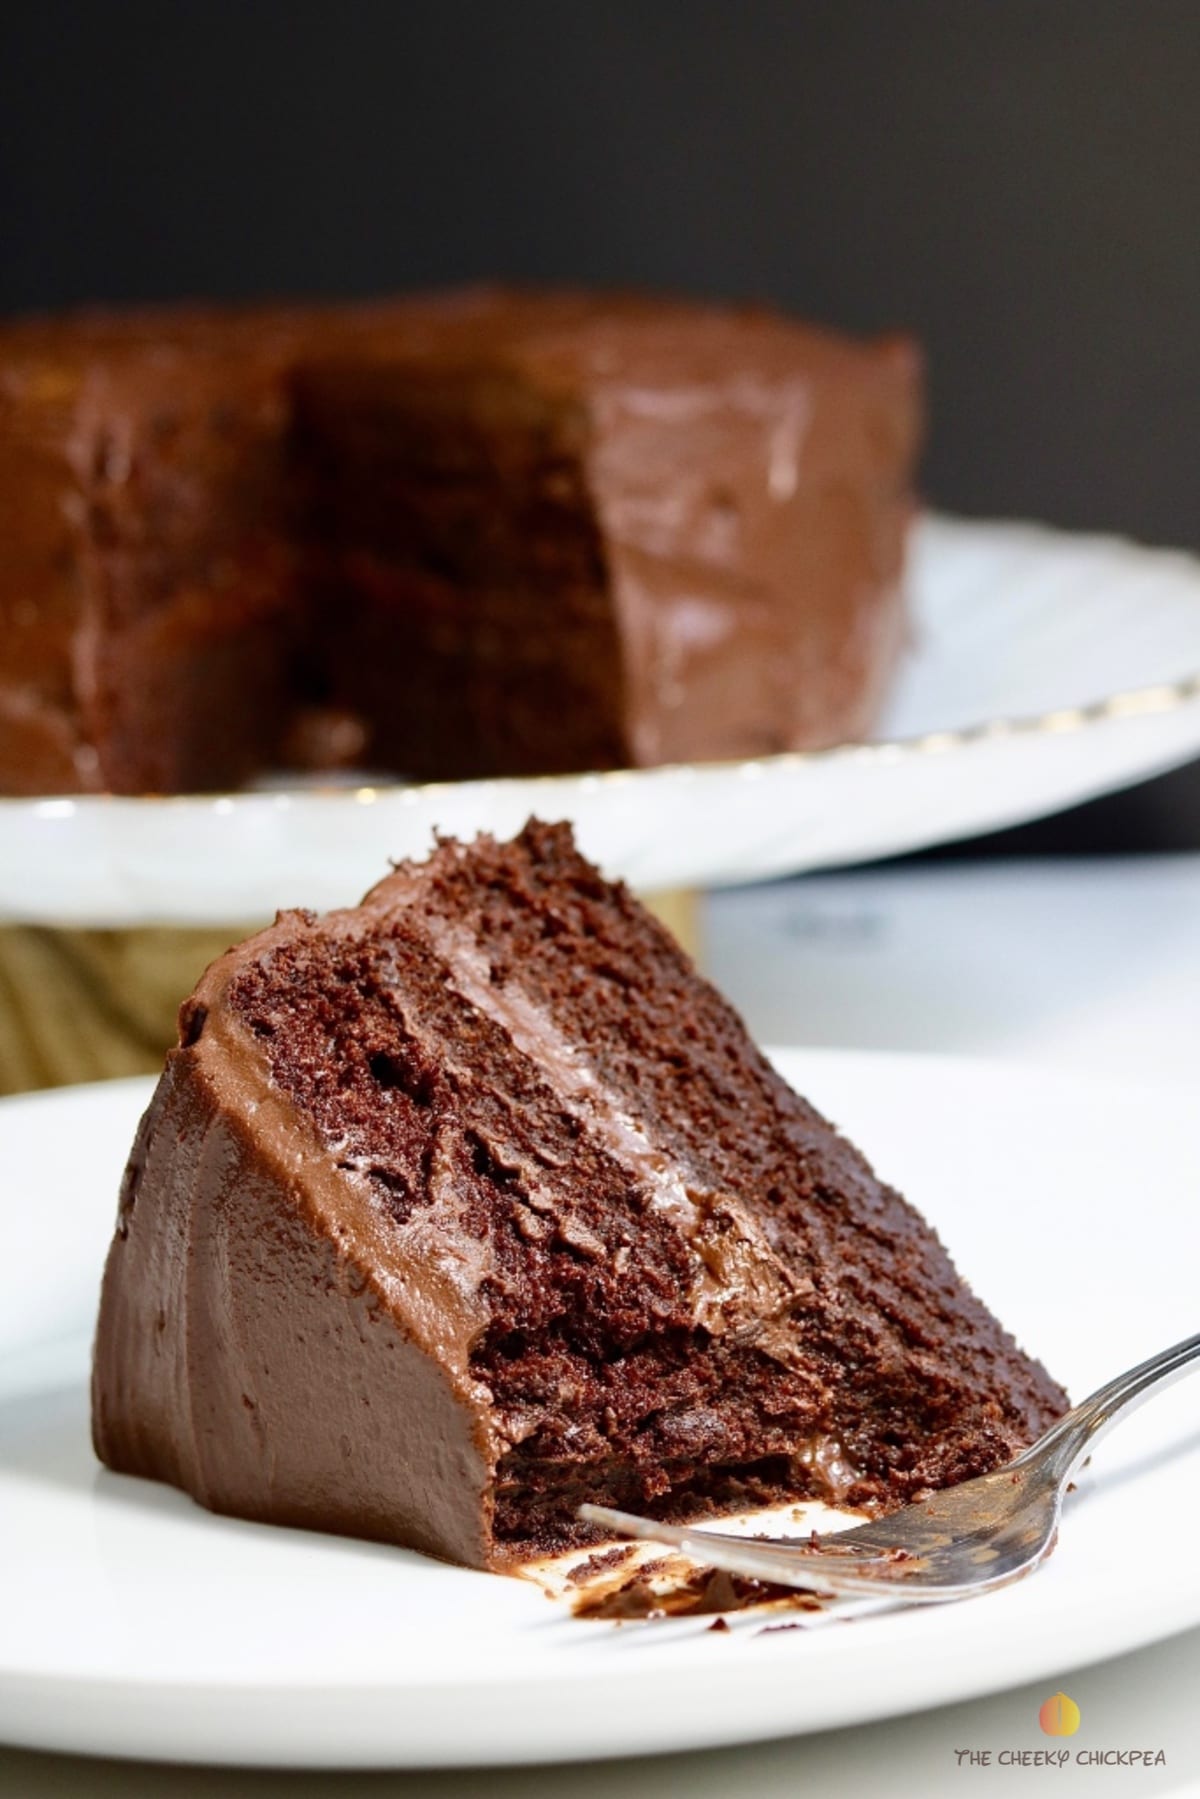 The Best Vegan Chocolate Cake EVER! (Easy Recipe) - The Cheeky Chickpea